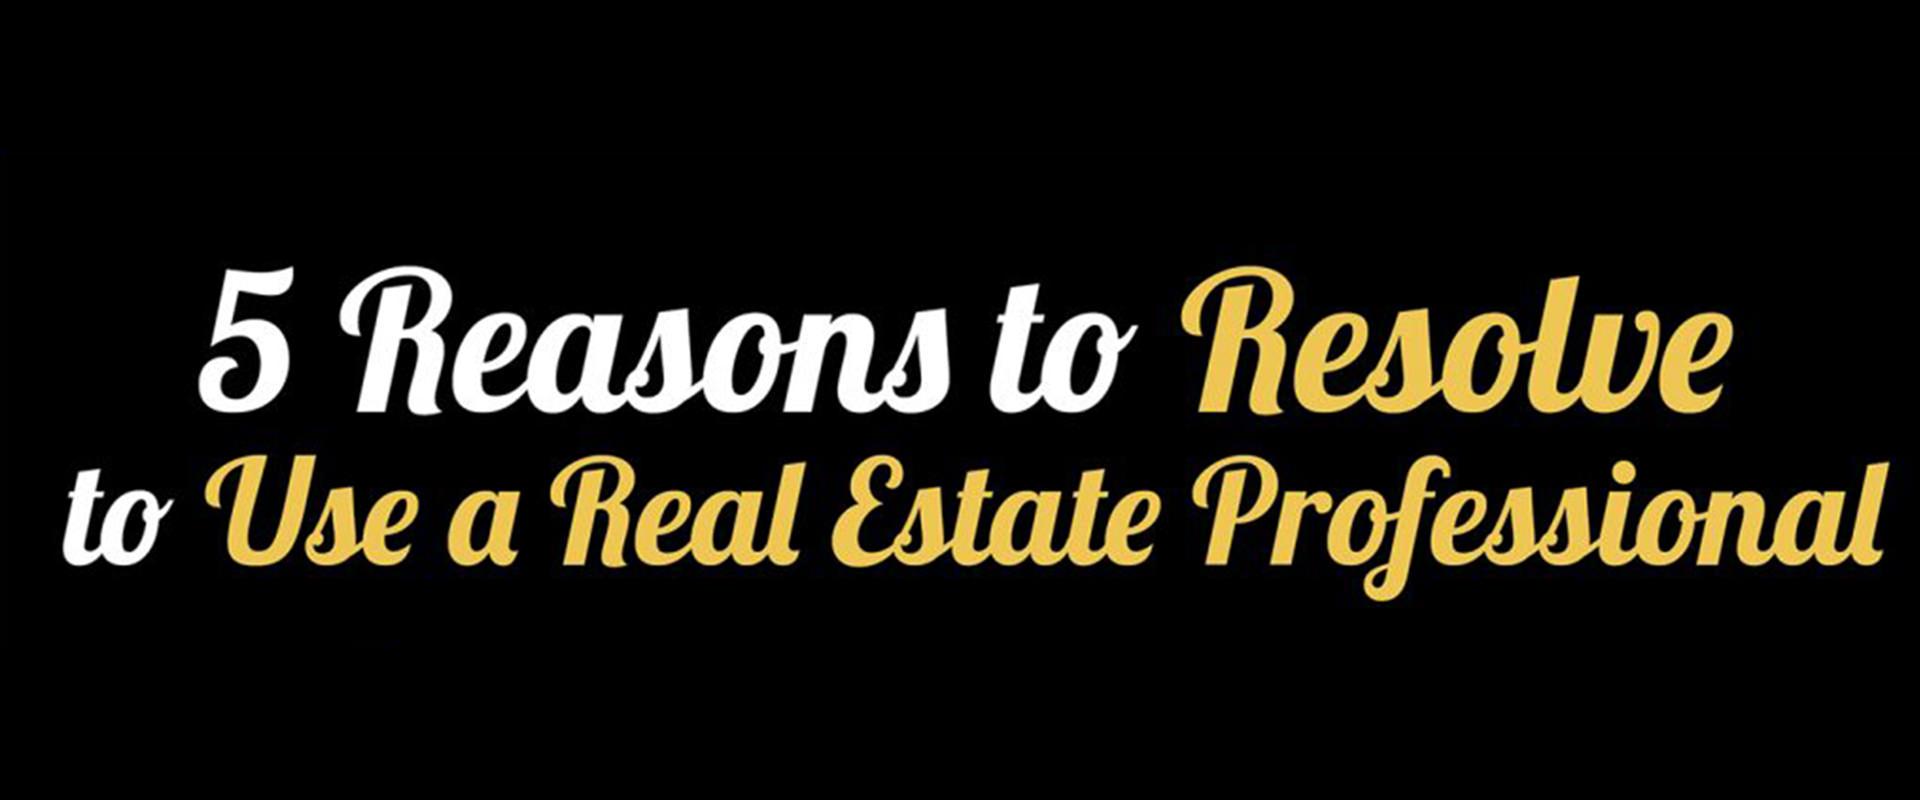 5 Reasons to Resolve to Hire a Real Estate Professional [INFOGRAPHIC]